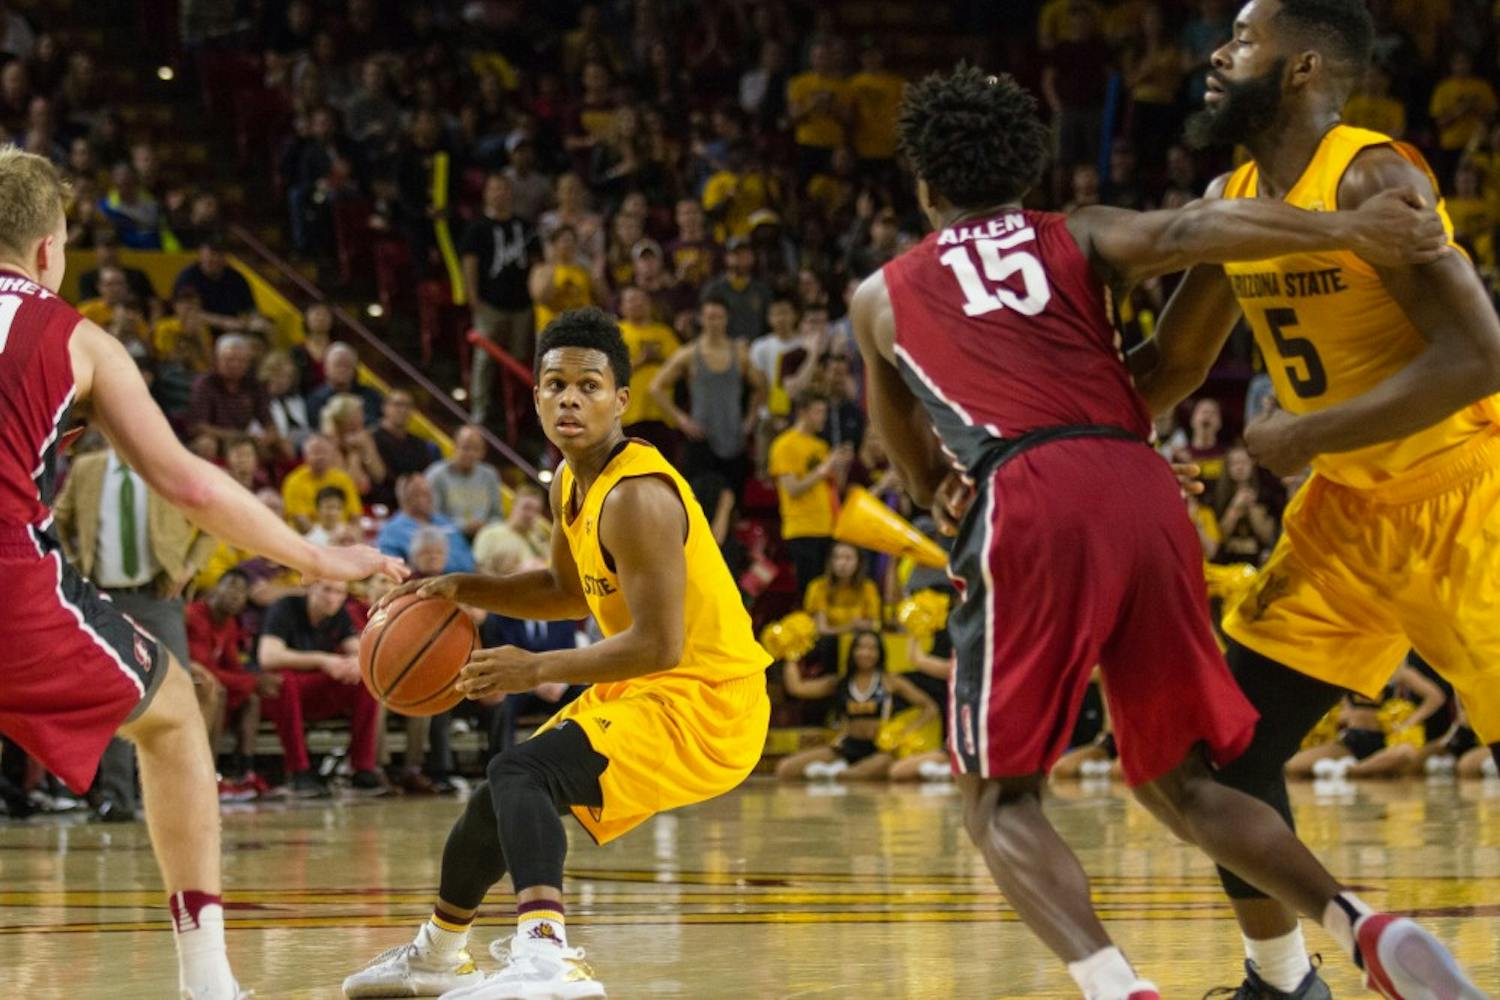 ASU junior guard, Tra Holder, looks for a pass during a men's basketball game versus the University of Stanford Cardinal in Wells Fargo Arena in Tempe, Arizona on Saturday, Feb. 11, 2017. ASU won 75-69.